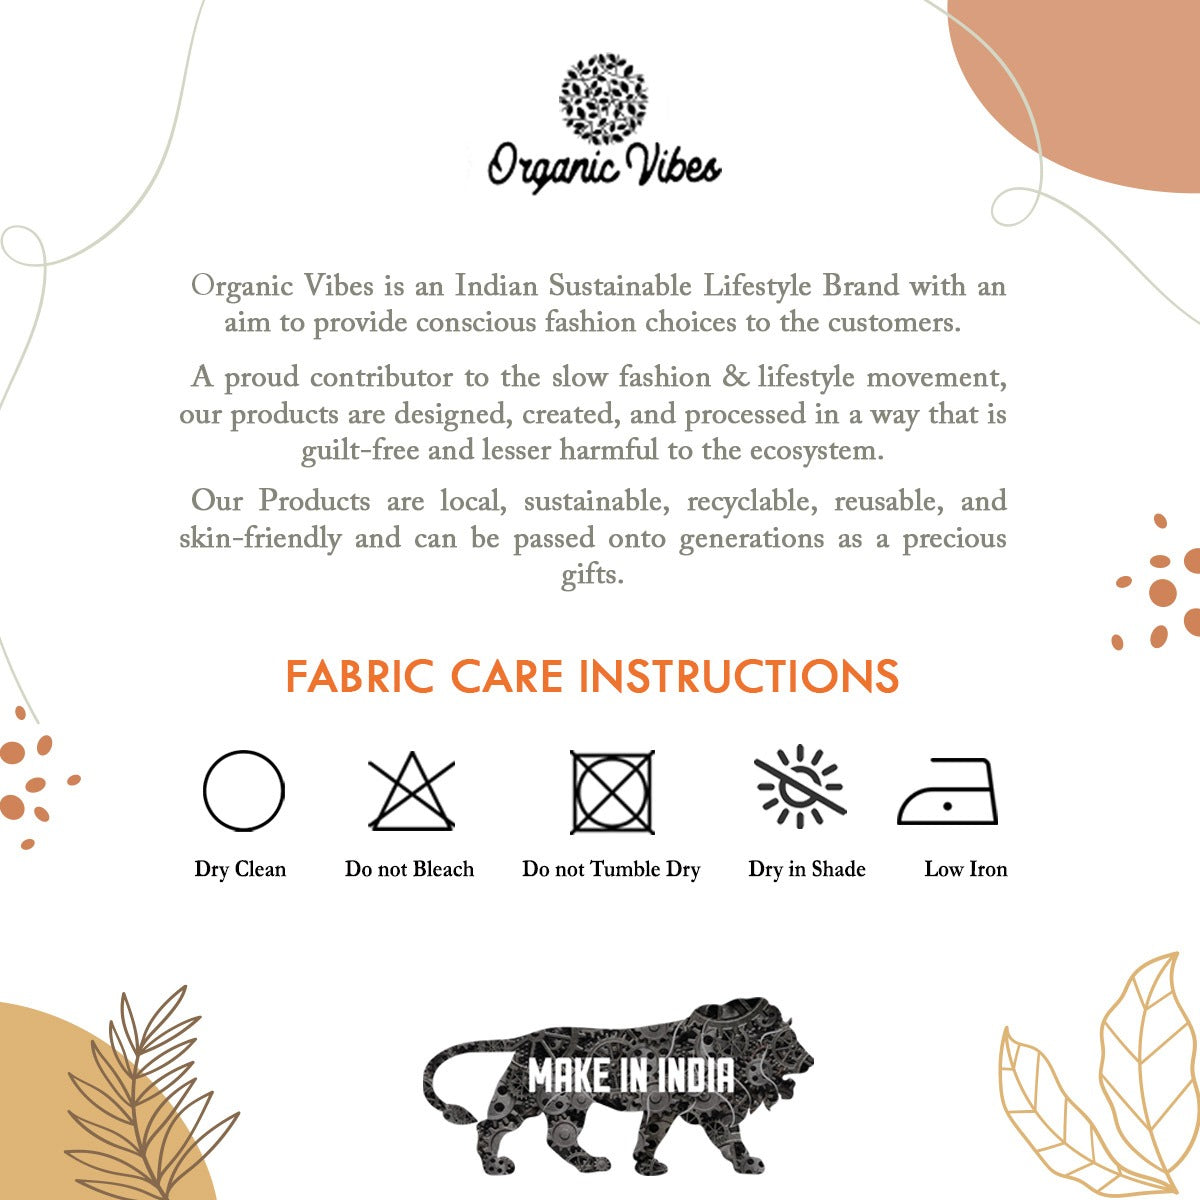 Organic Vibes Bedsheet Care Guide